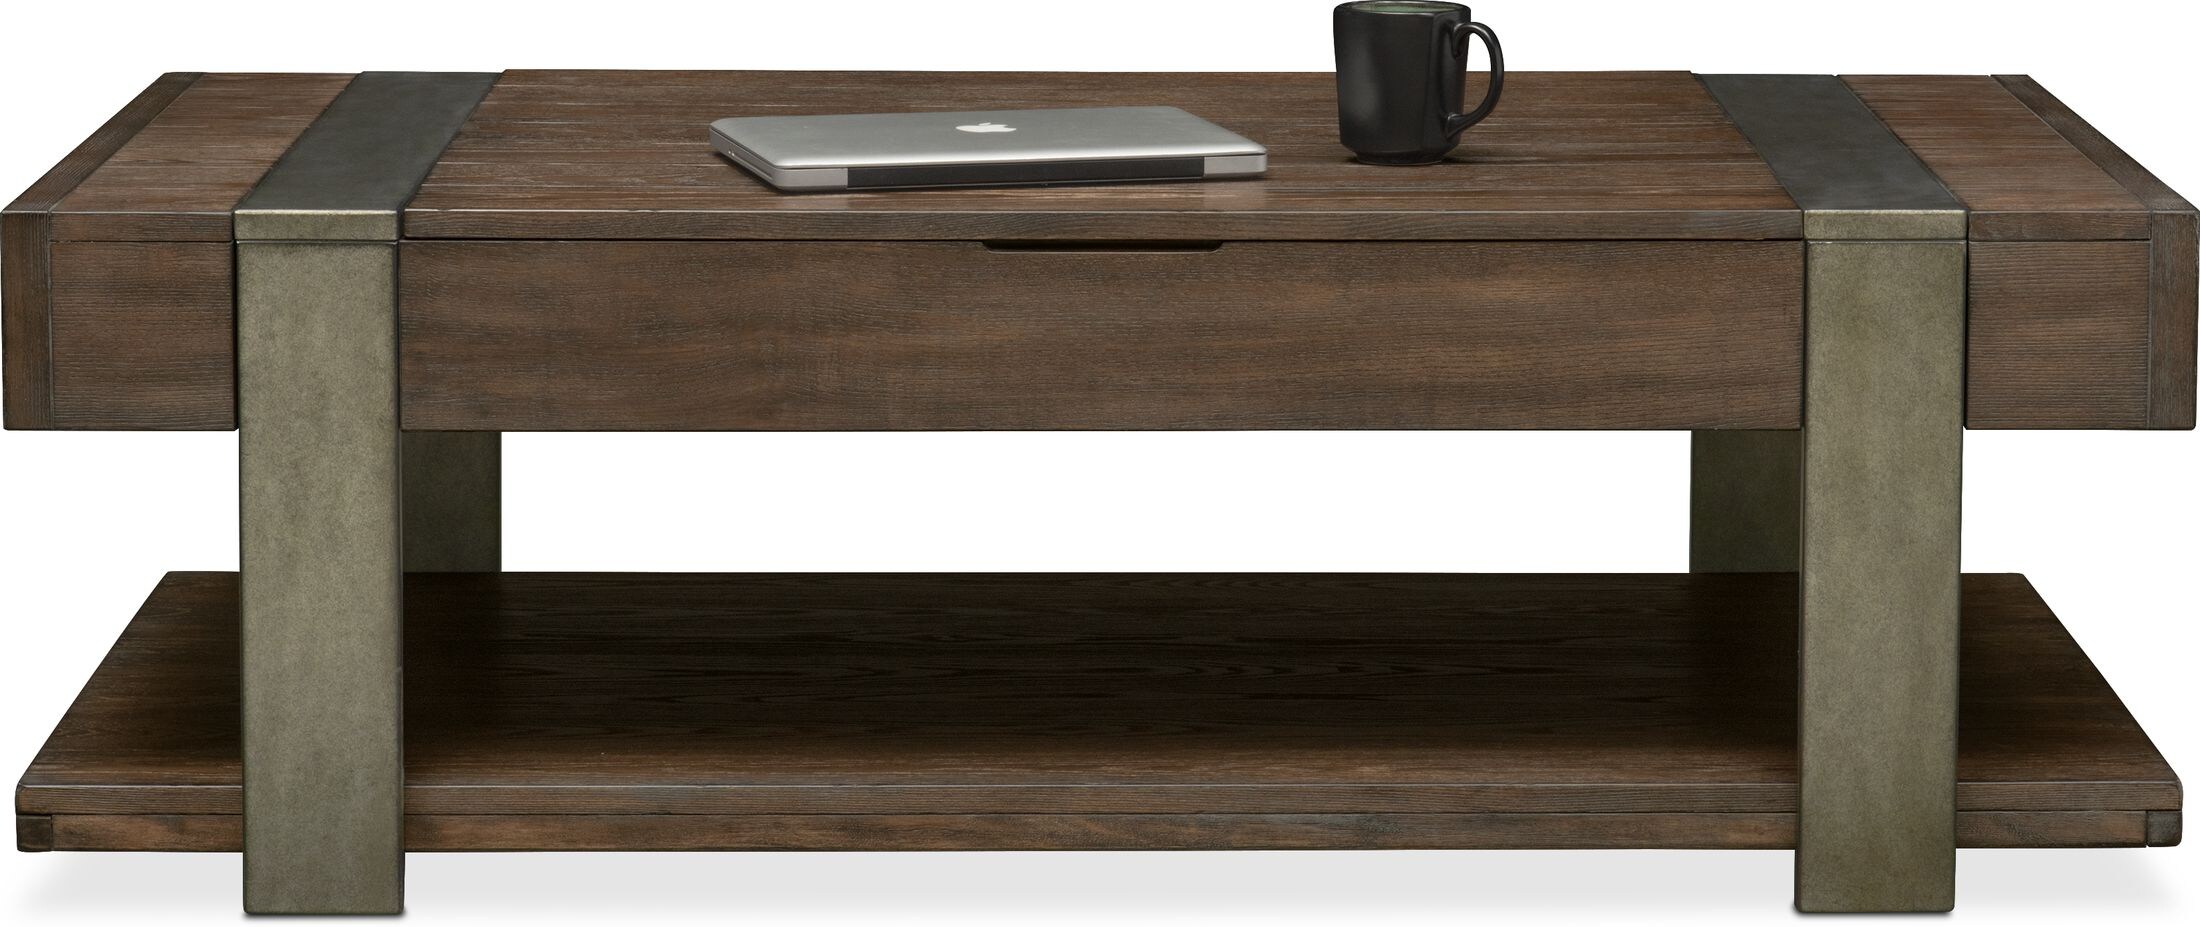 value city coffee tables